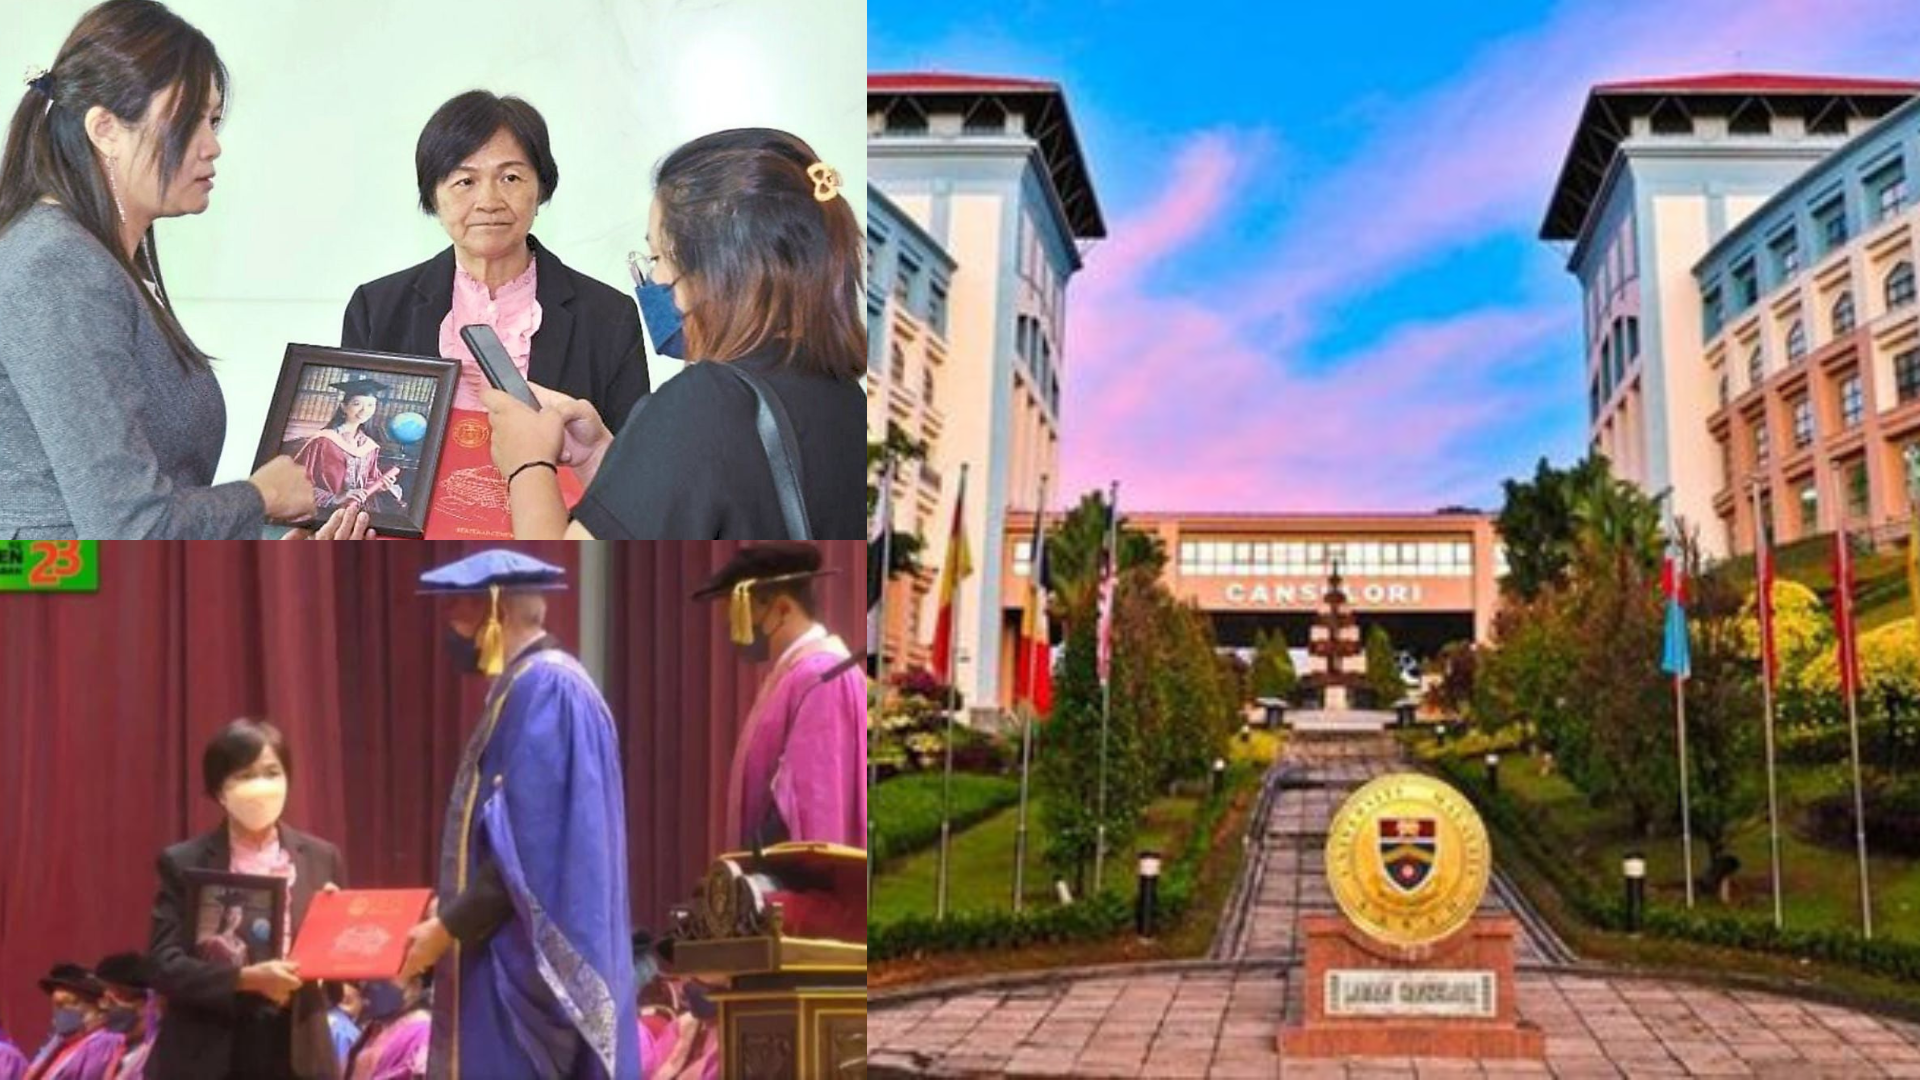 On June 26, Cheng Lak Mooi went up on stage at the 23rd Universiti Malaysia Sabah (UMS) Convocation ceremony to receive her late daughter’s PhD scroll.